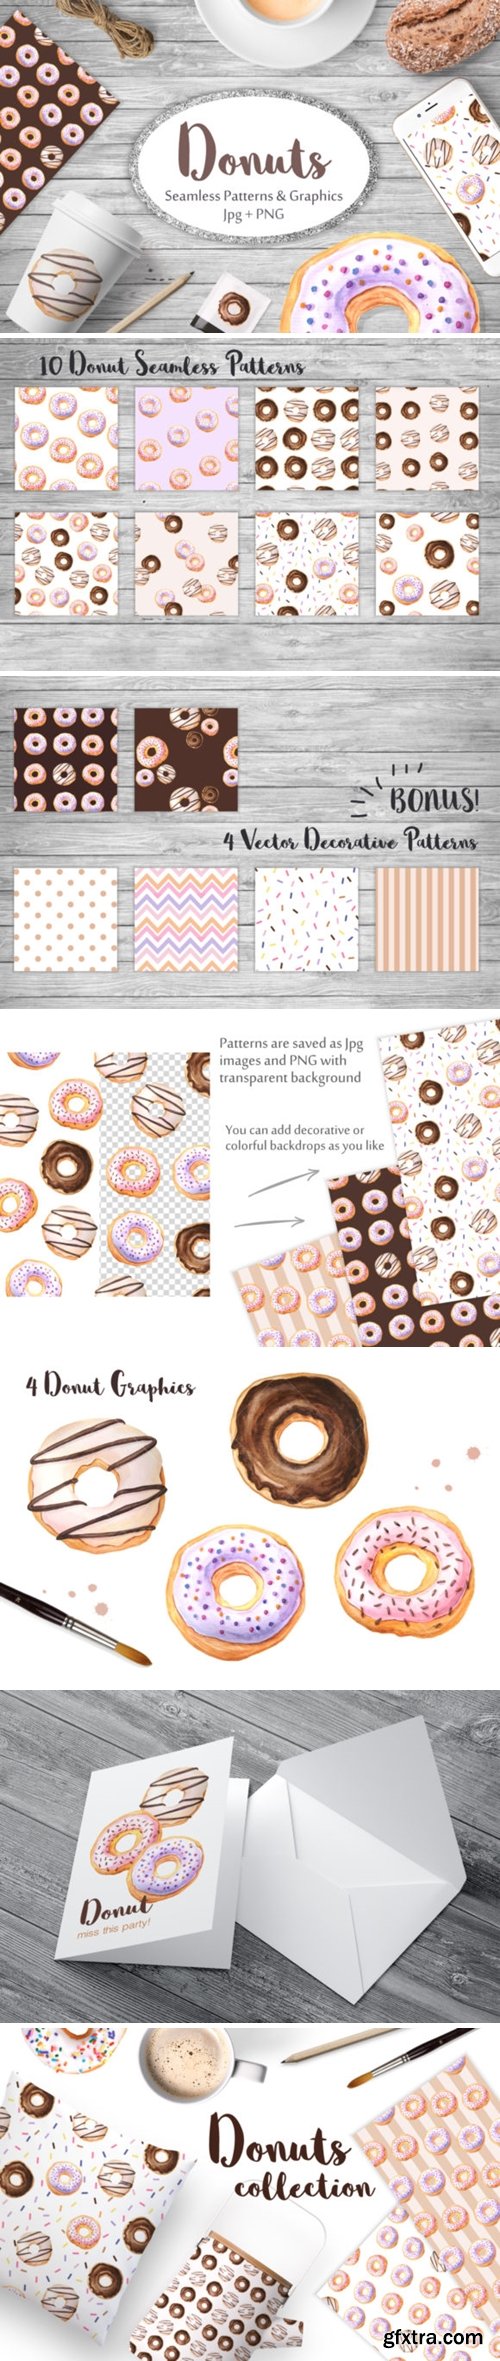 Watercolor Donuts Patterns&Graphics 2644937